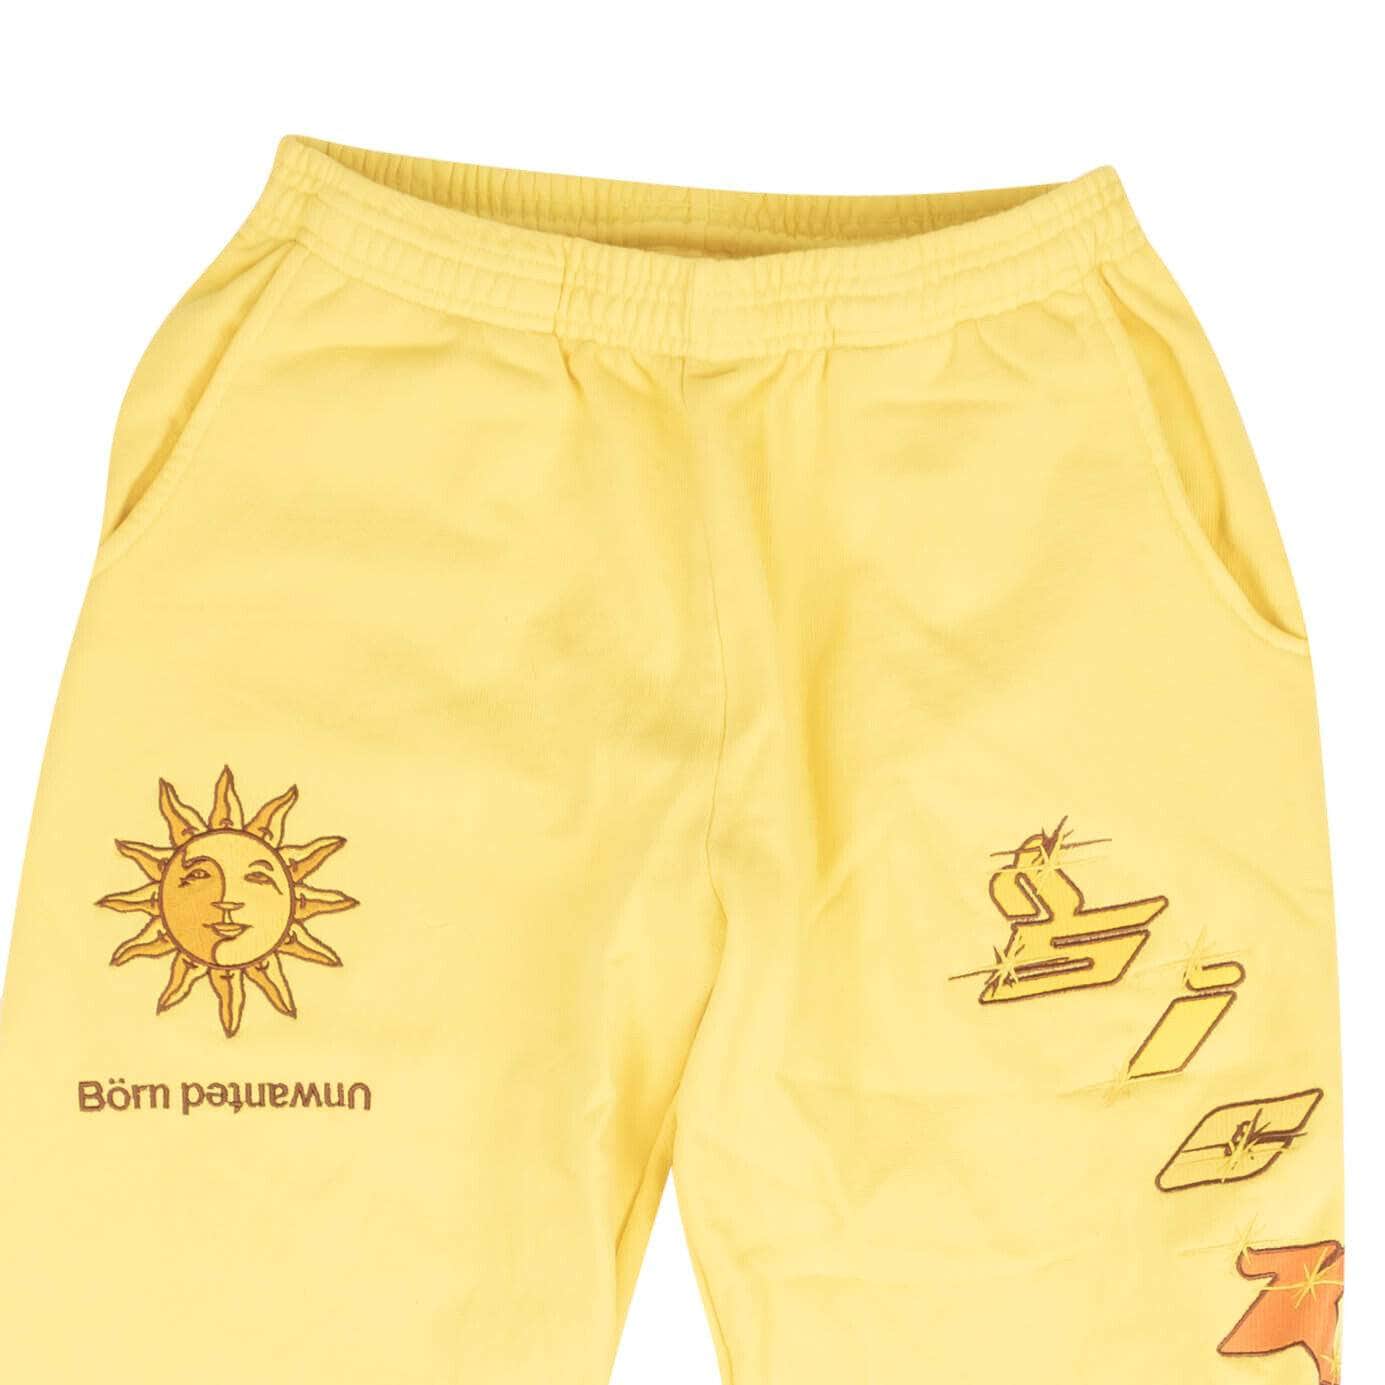 Sicko 250-500, channelenable-all, chicmi, couponcollection, gender-mens, main-clothing, mens-joggers-sweatpants, mens-shoes, sicko, size-l, size-m, size-s, size-xl, size-xxl Yellow Luke.wav Embroidered Sweatpants